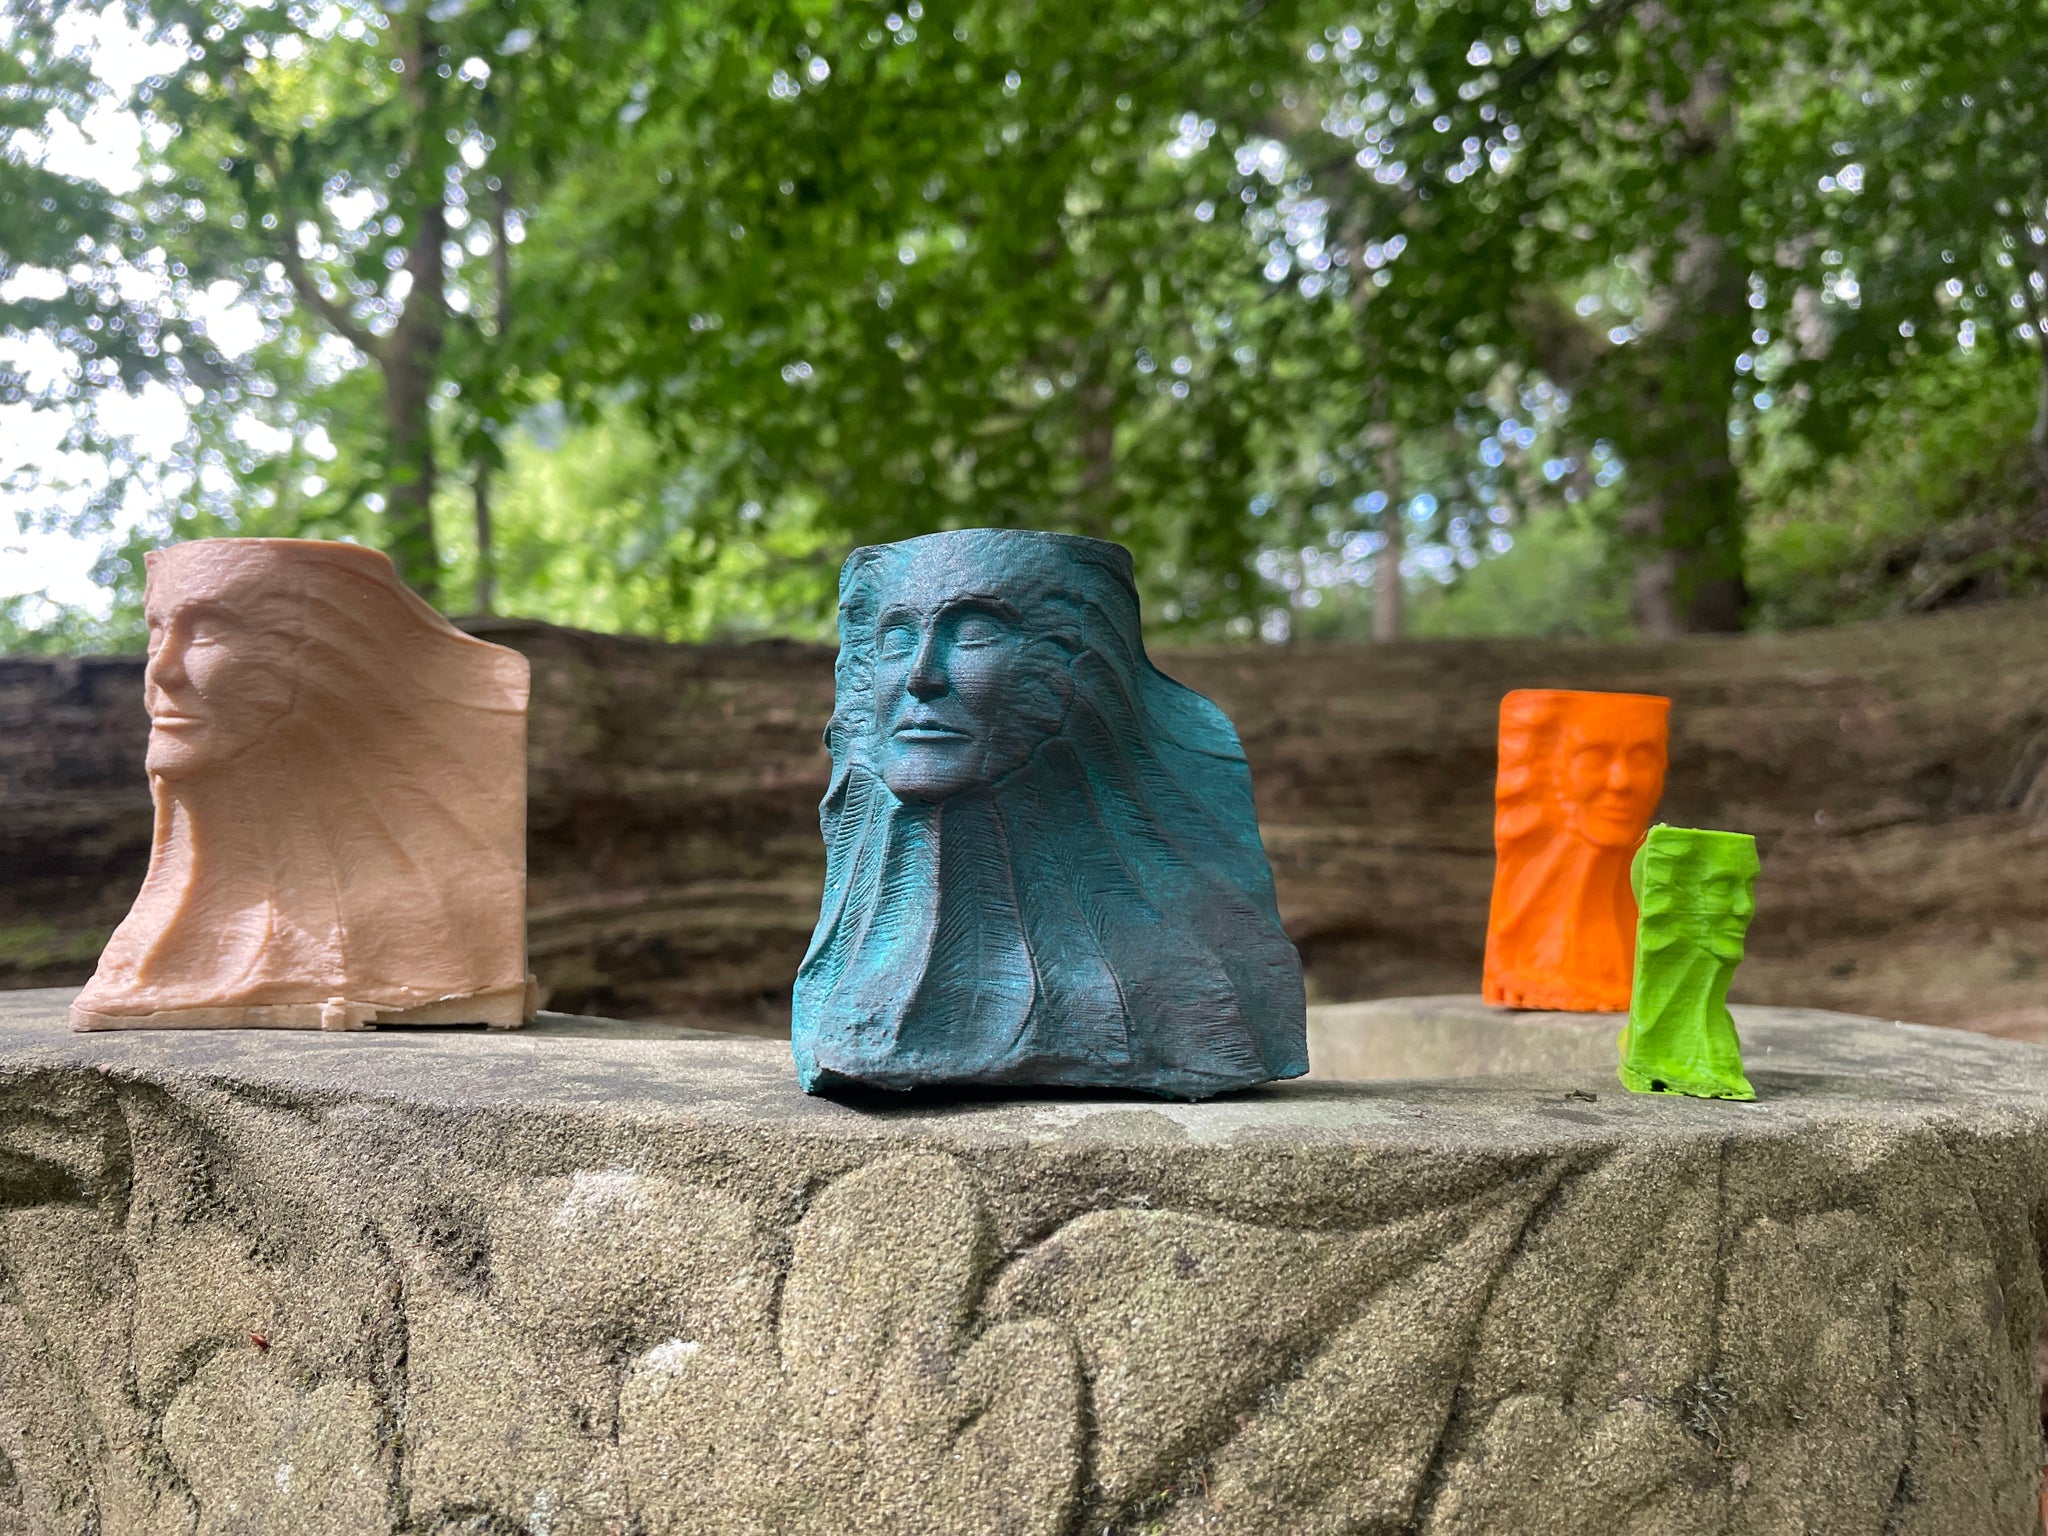 Introducing Our New Limited Edition 3D Printed Sculptures